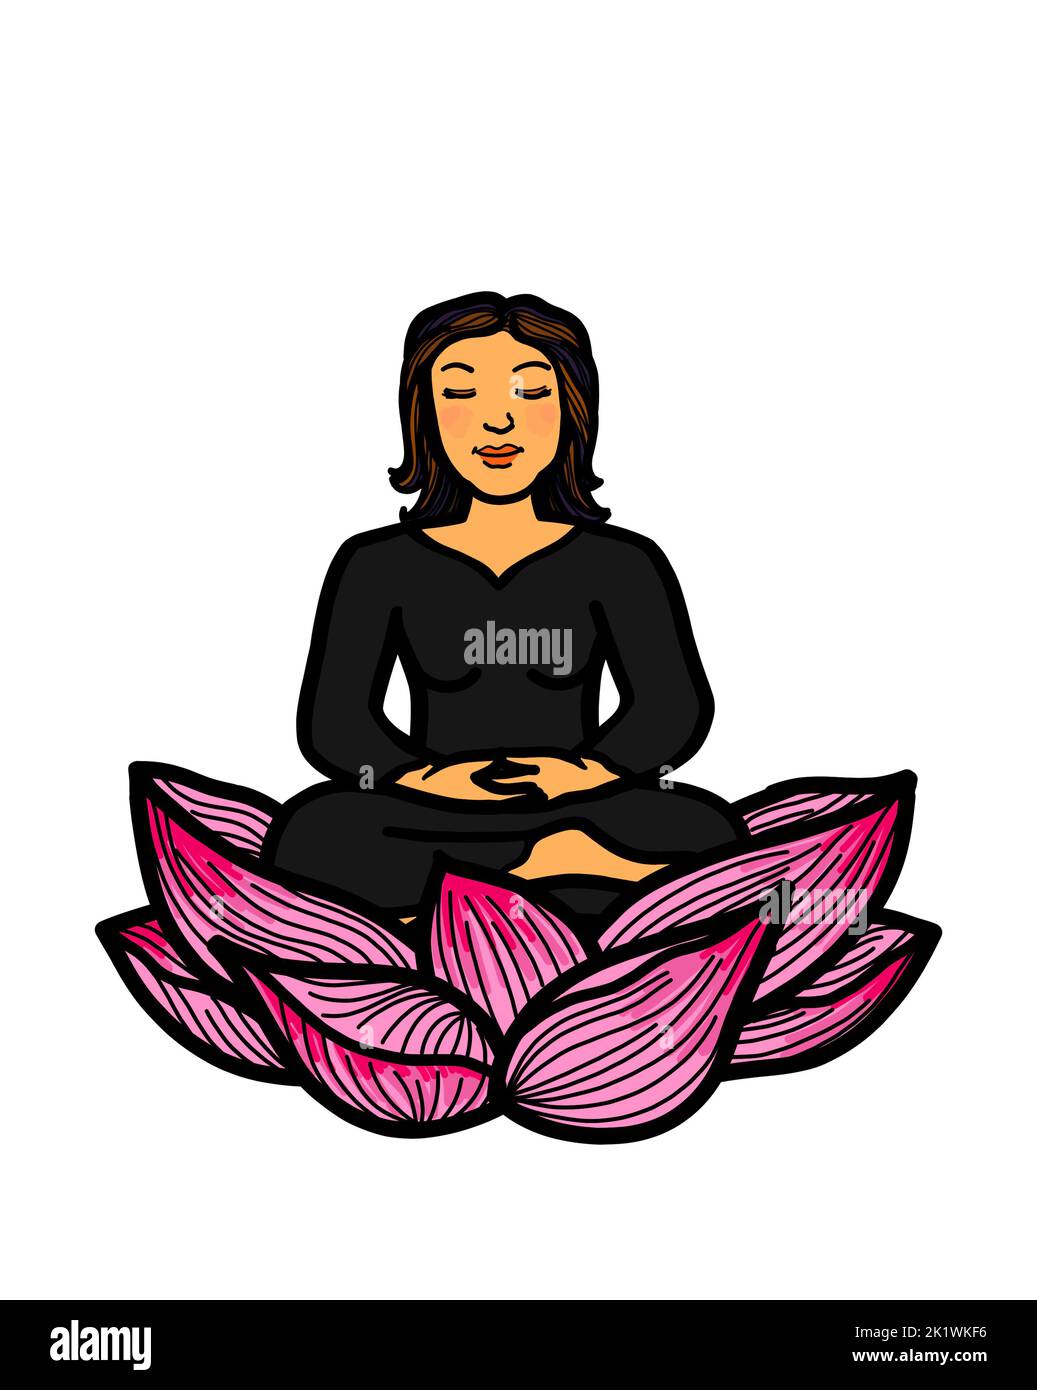 A young Caucasian woman sitting in lotus pose meditating. Buddhist meditation practice for mindfulness, peace, harmony and wellbeing. Stock Photo